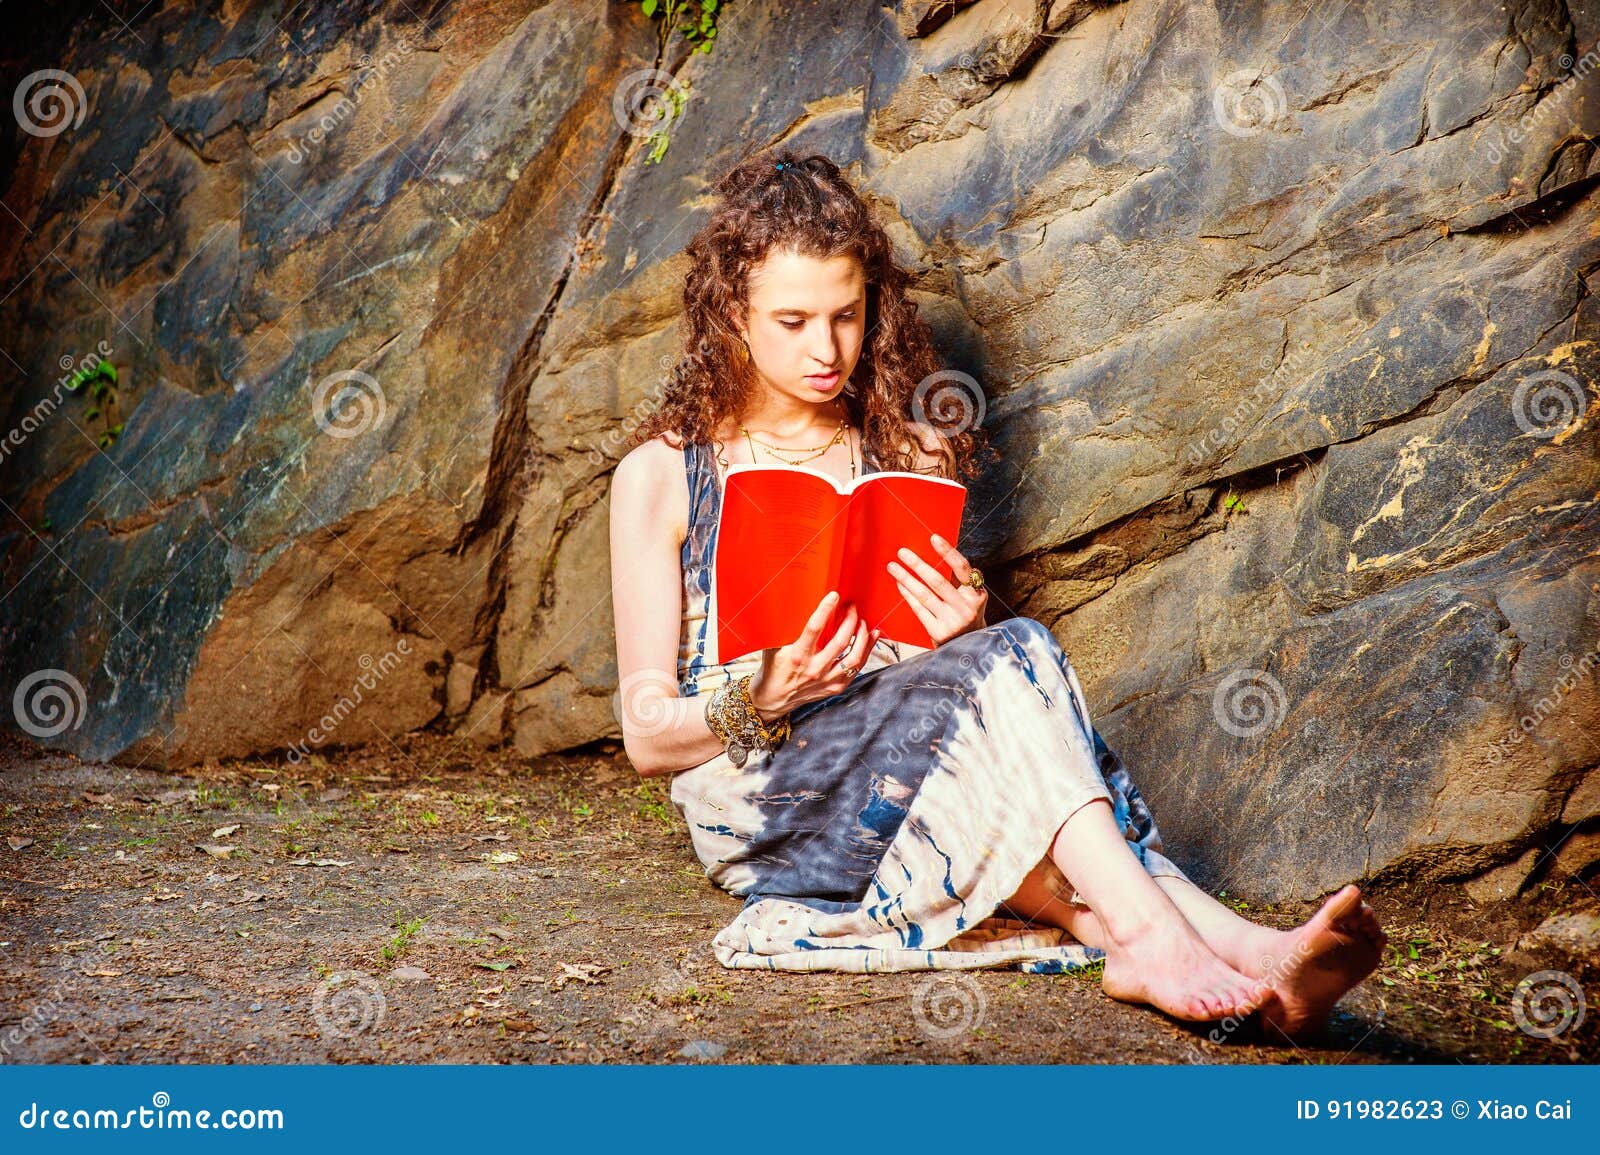 https://thumbs.dreamstime.com/z/young-american-woman-reading-red-book-sitting-ground-travel-girl-outside-wearing-long-dress-bracelet-barefoot-pretty-teenage-91982623.jpg